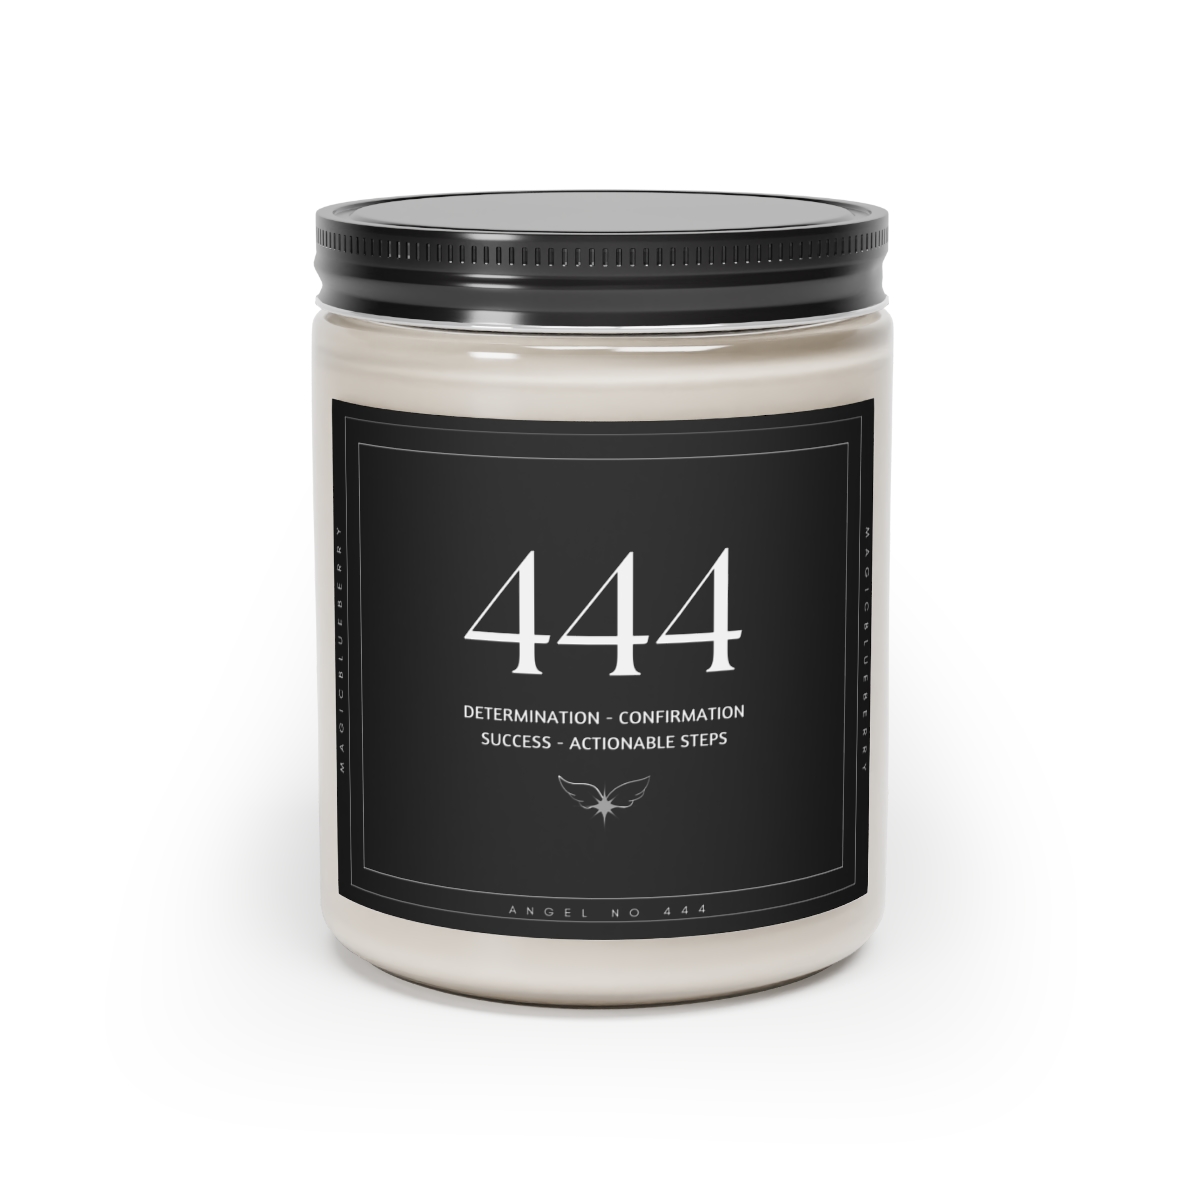 Angel Spell 444 - Scented Vegan Soy Wax Candles, Clear Jar Candle, Spell Candles, Sassy Candle, Vegan Candle, Cotton Wick Candle product thumbnail image